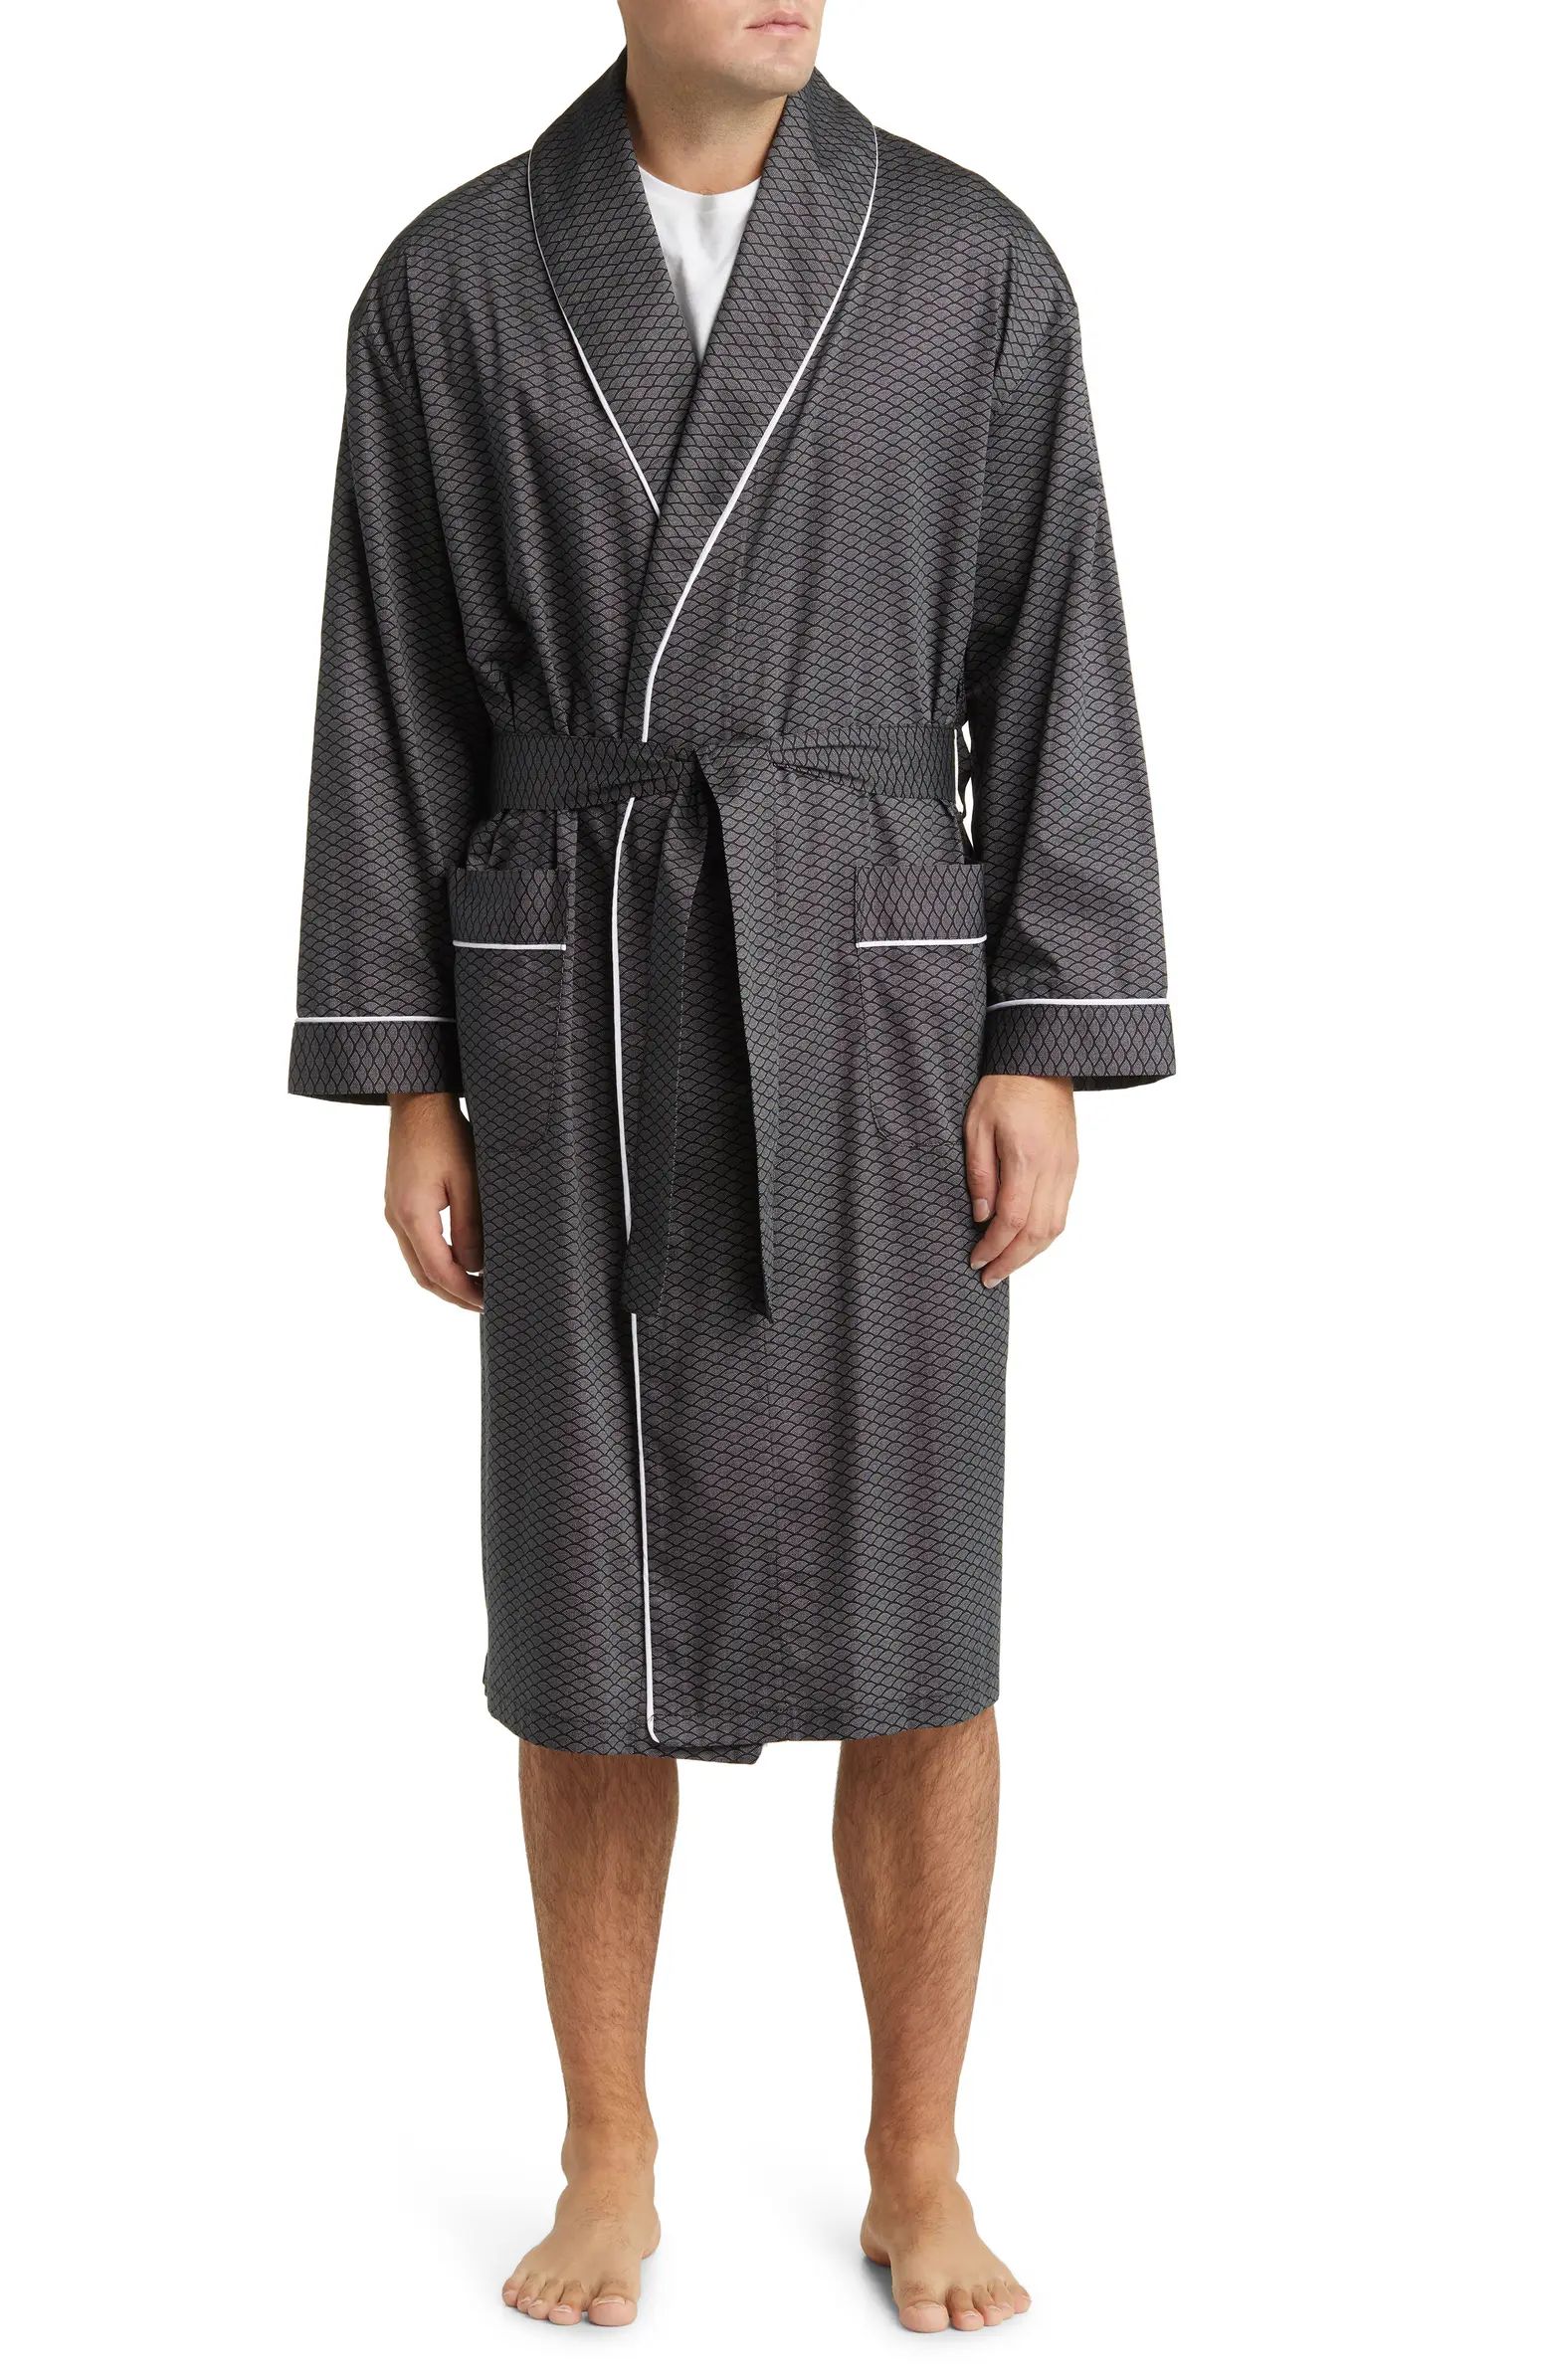 Southport Shawl Collar Robe | Nordstrom